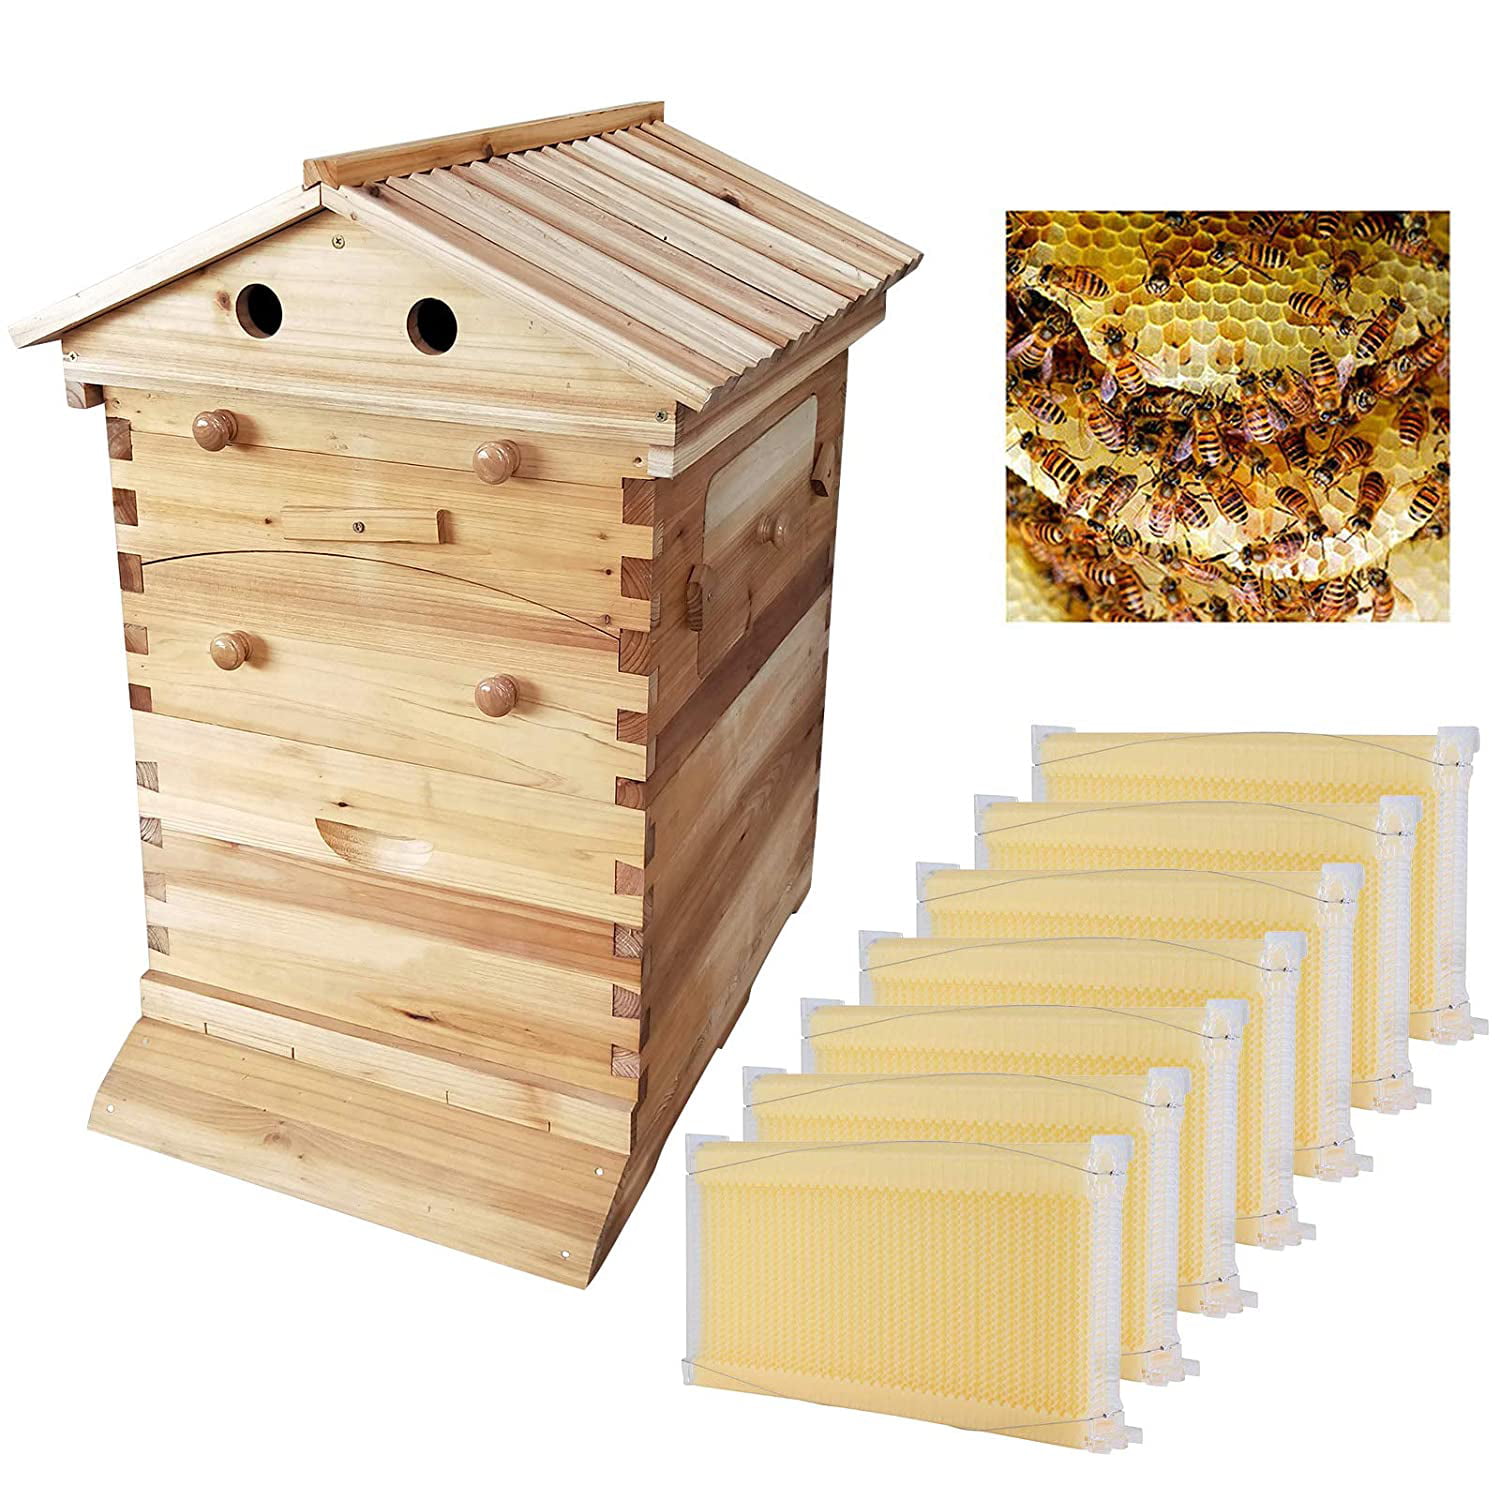 Wooden Beekeeping Beehive House 7PCS Upgraded Auto Run Bee Comb Hive Frames US 767853031925 